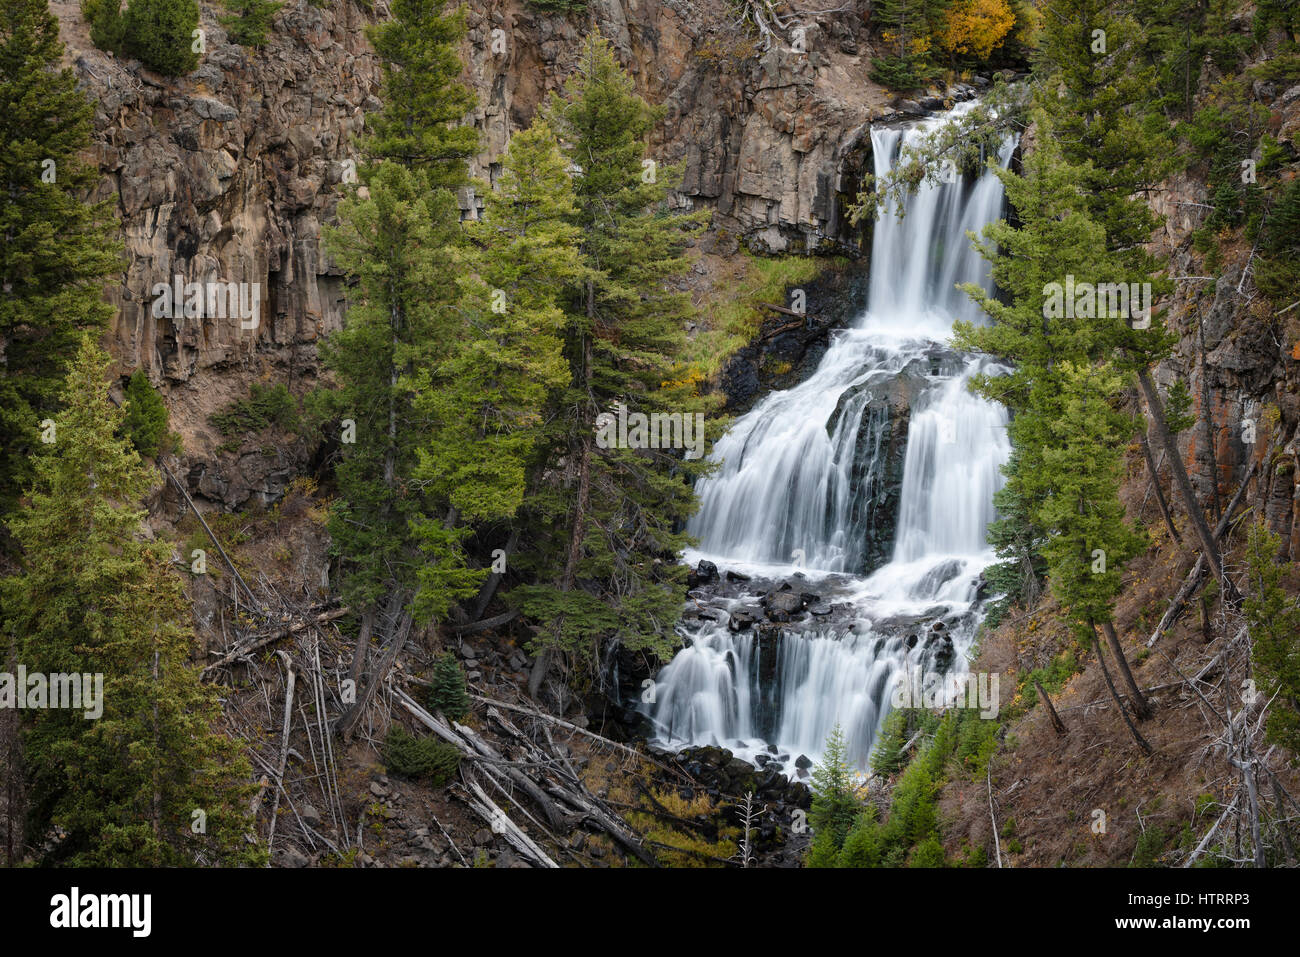 Heinz-günther Falls, parc national de Yellowstone, Wyoming, USA Banque D'Images